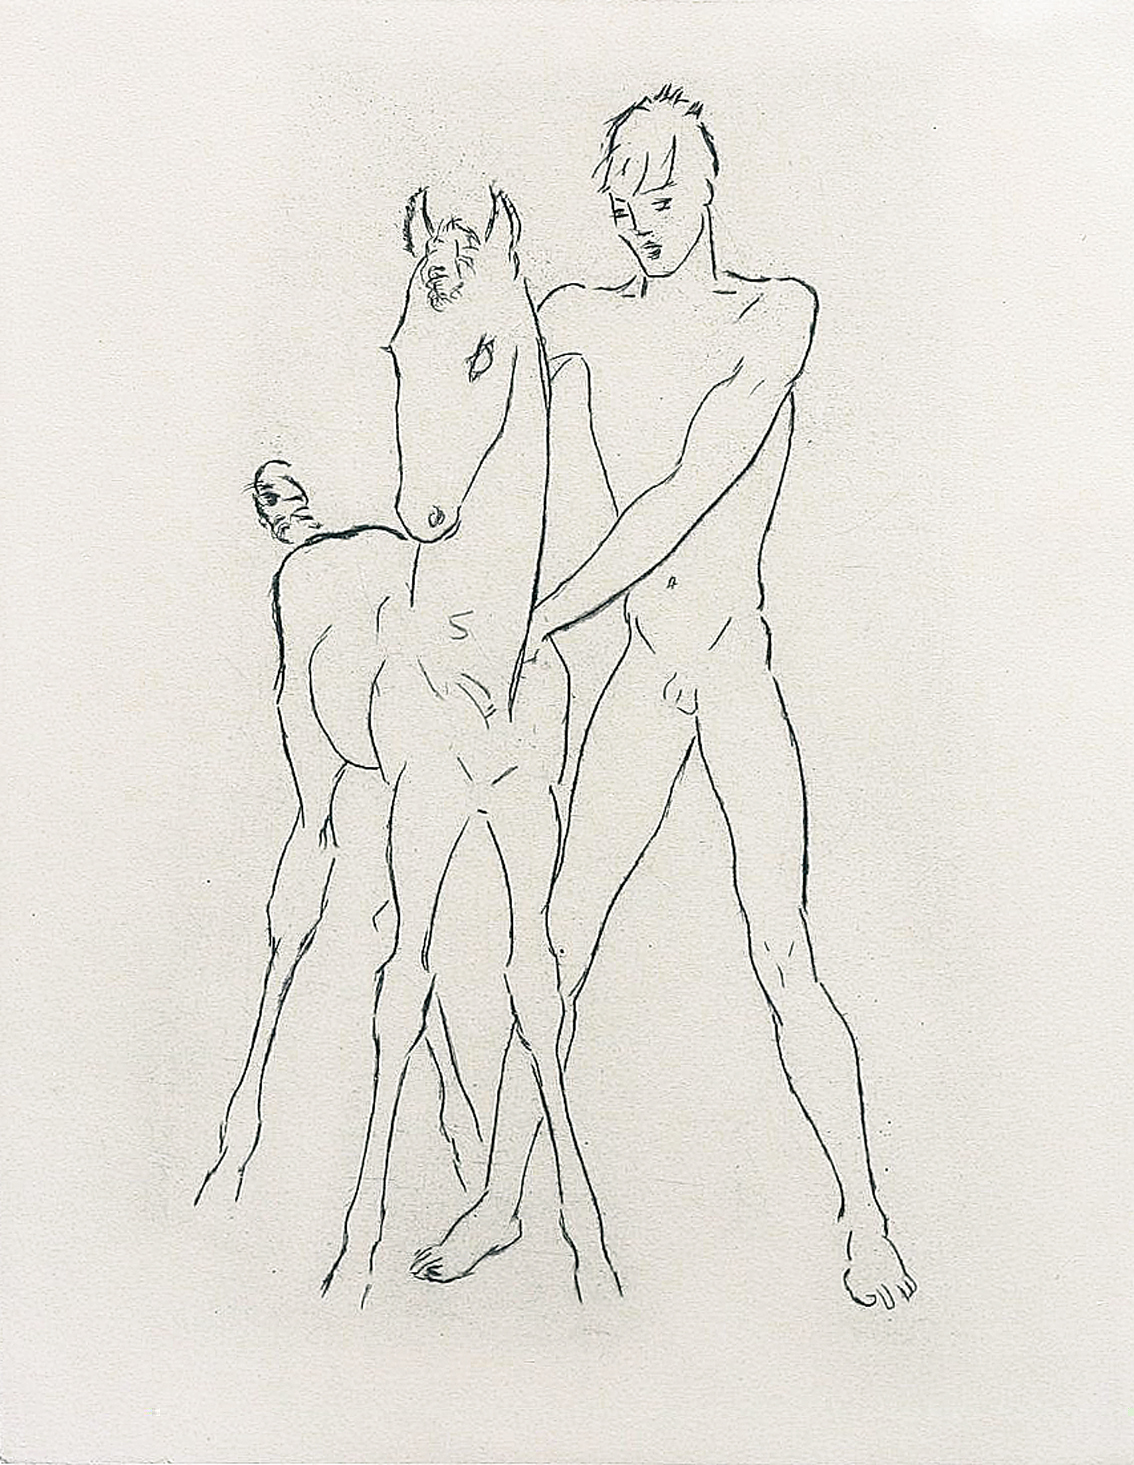 "A boy with a foal"